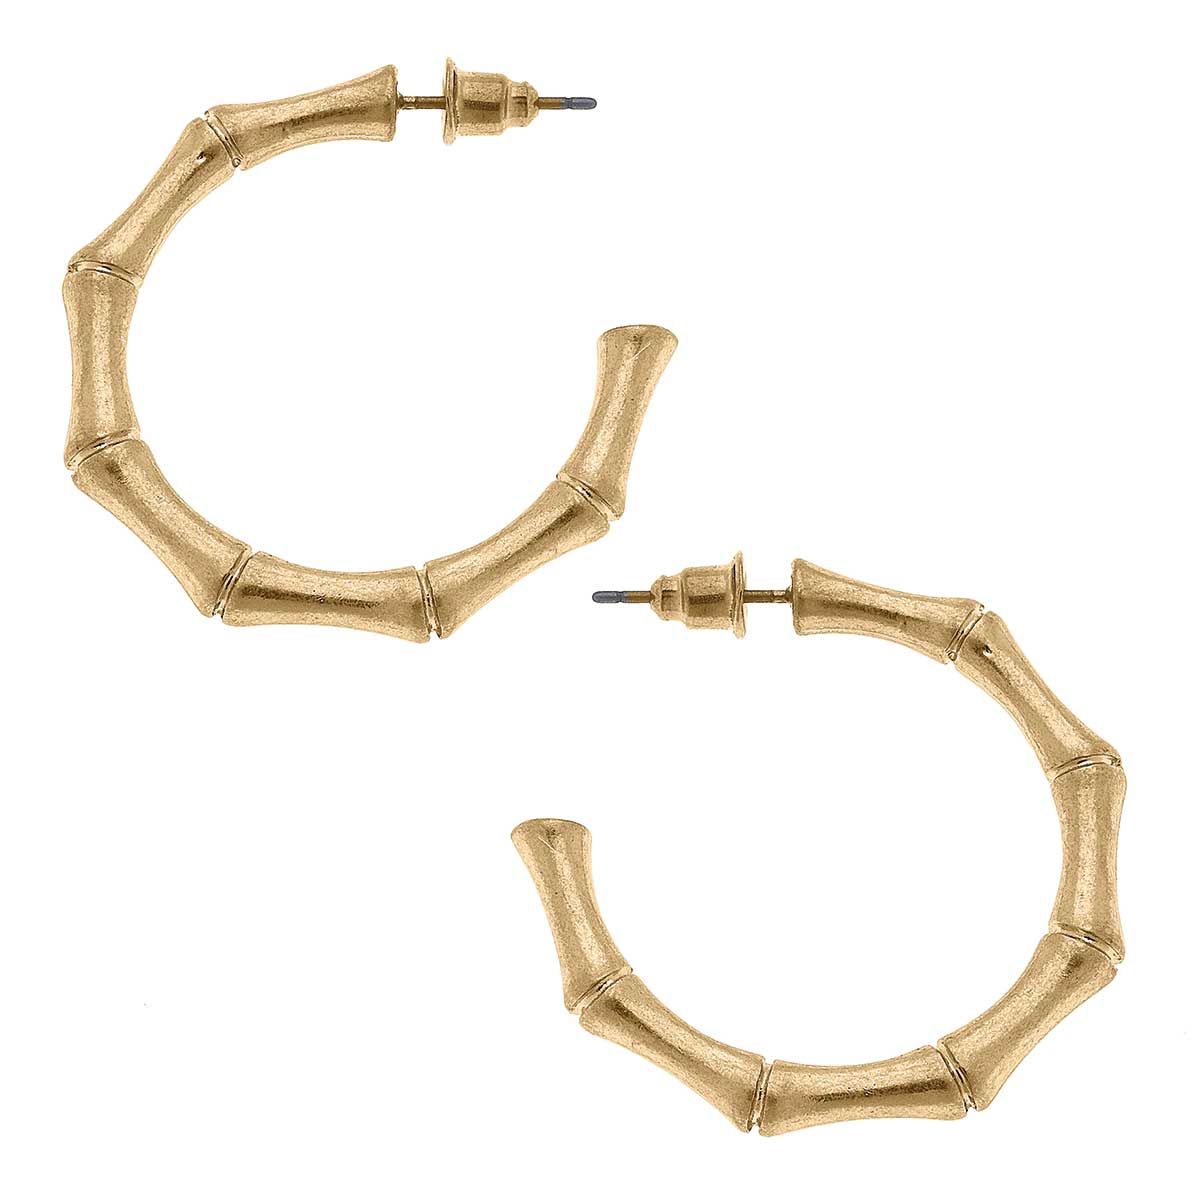 Mia Bamboo Statement Hoop Earrings in Worn Gold | CANVAS